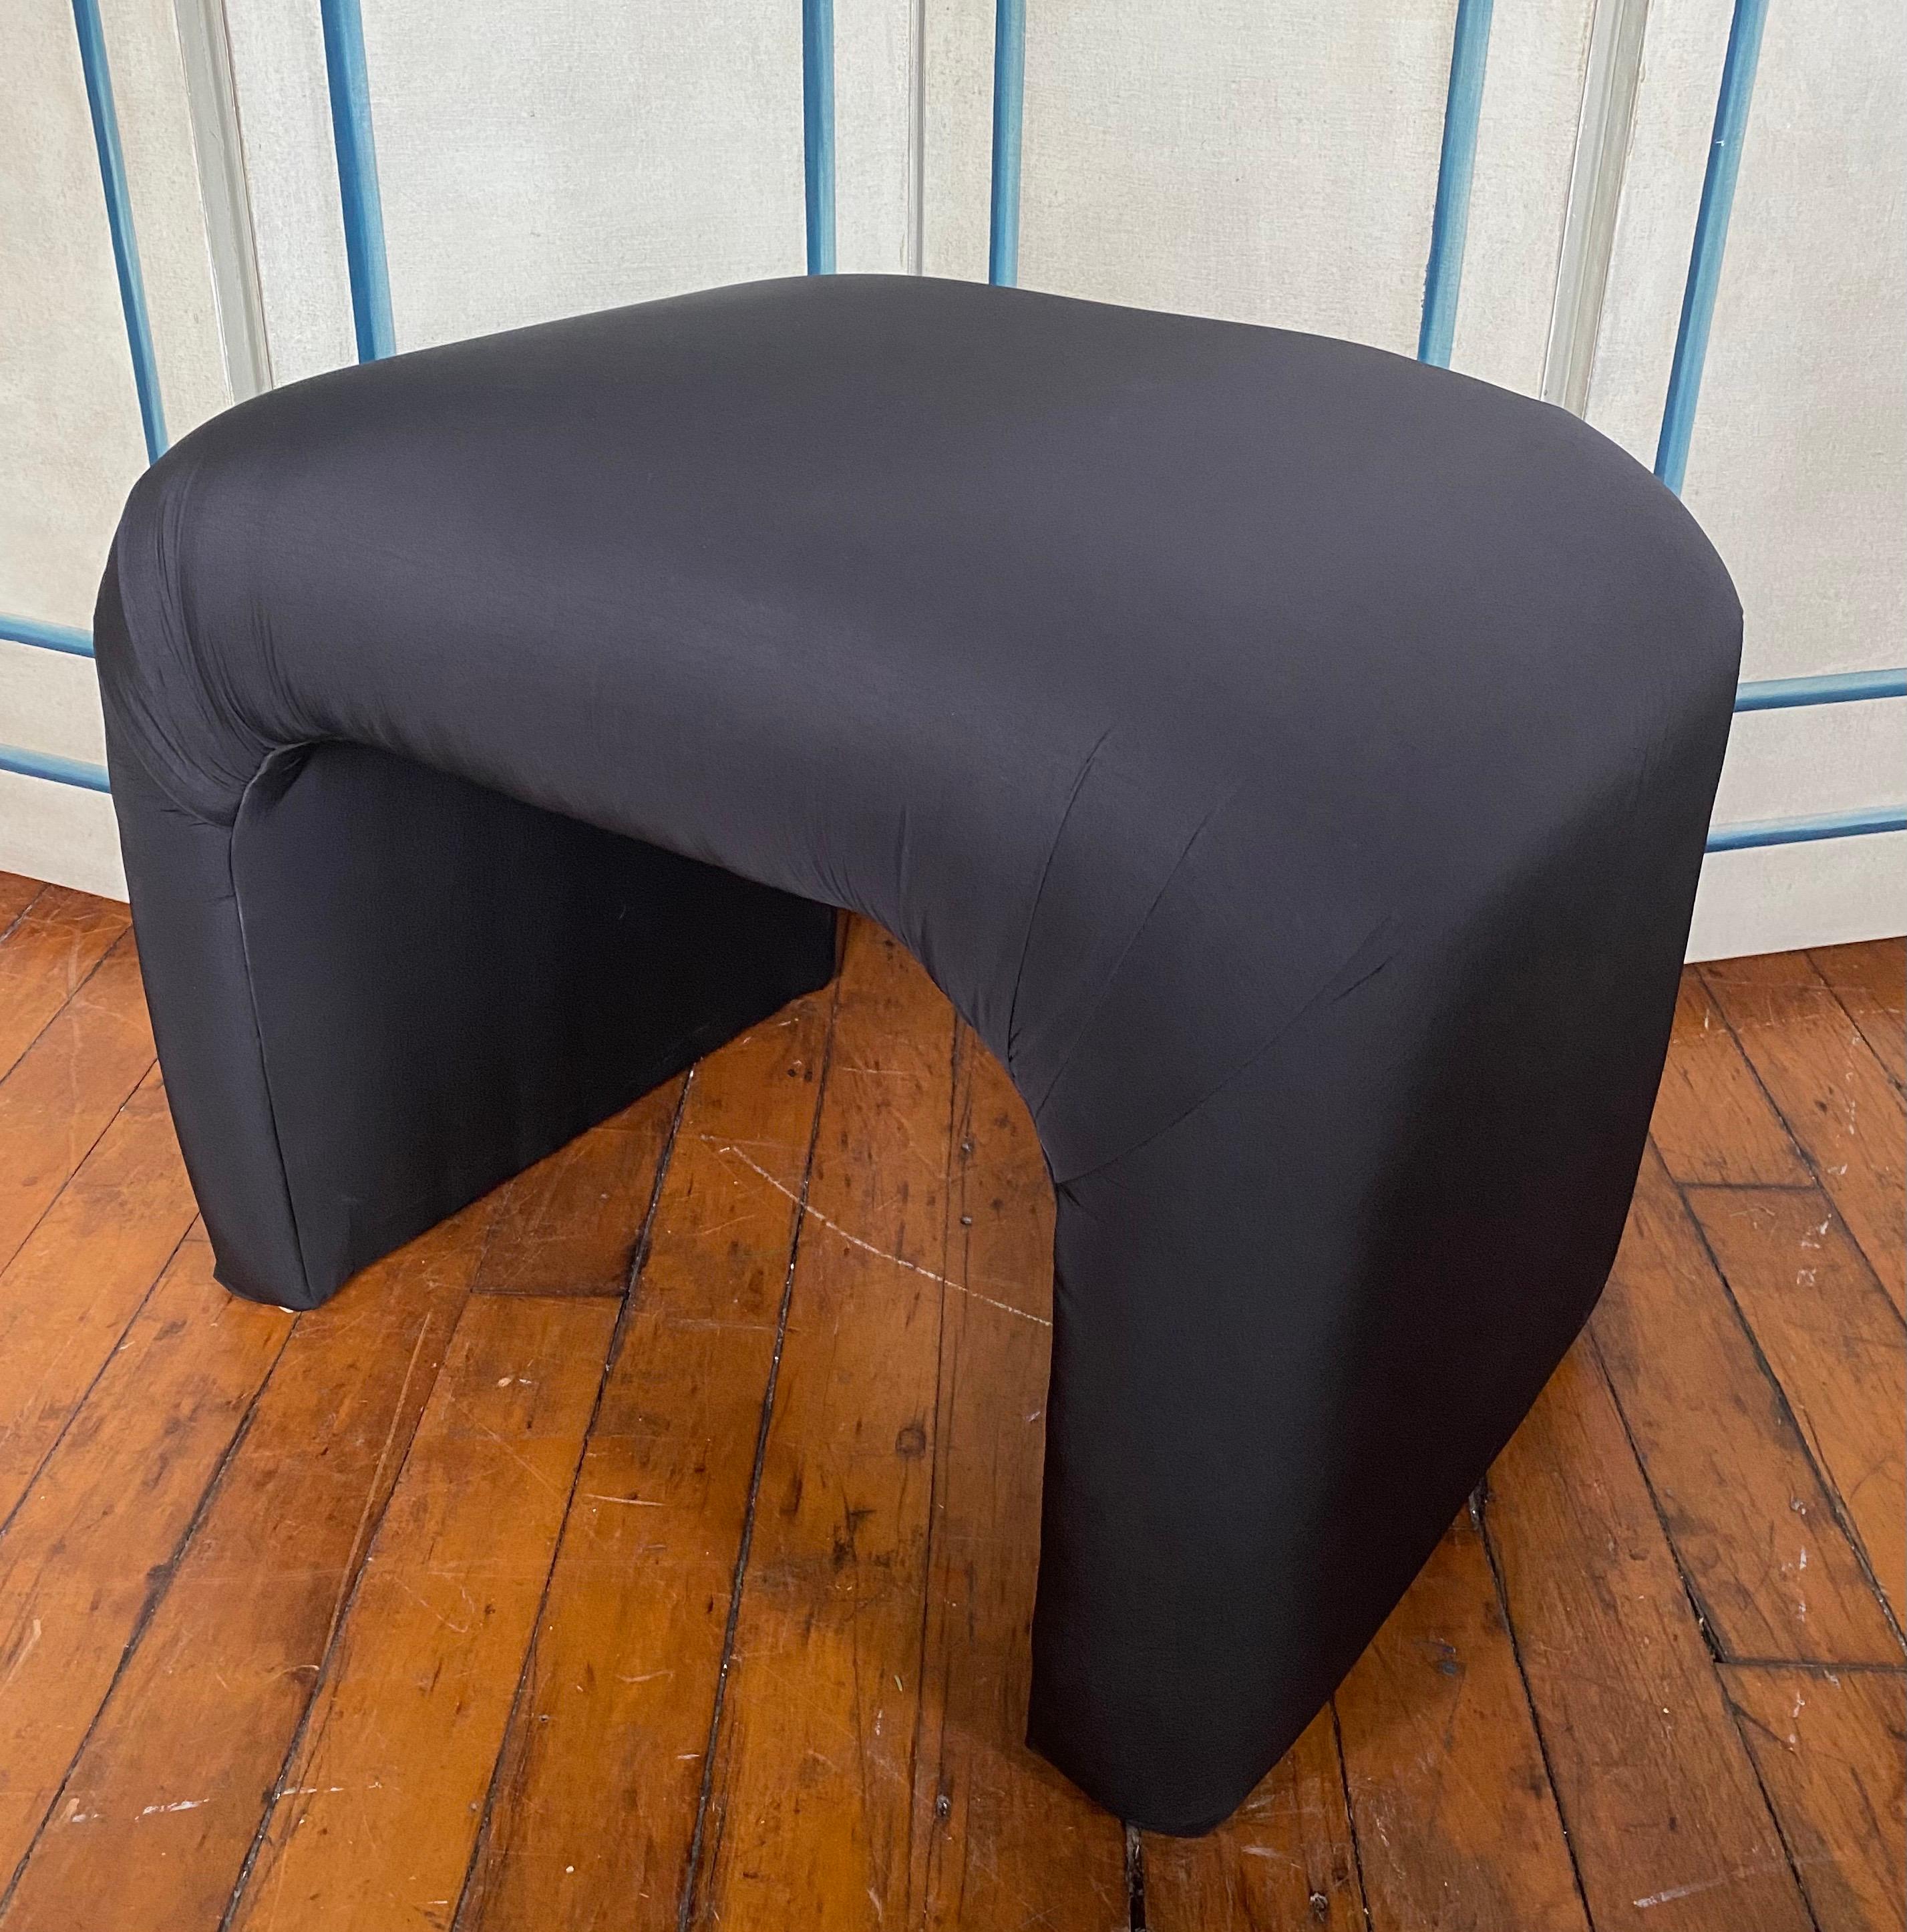 Post modern curved waterfall bench upholstered in a black satin fabric. This sculptural Hollywood Regency style stool is perfect for extra seating. In the style of Karl Springer.

Coordinating chair in same fabric also available and listed